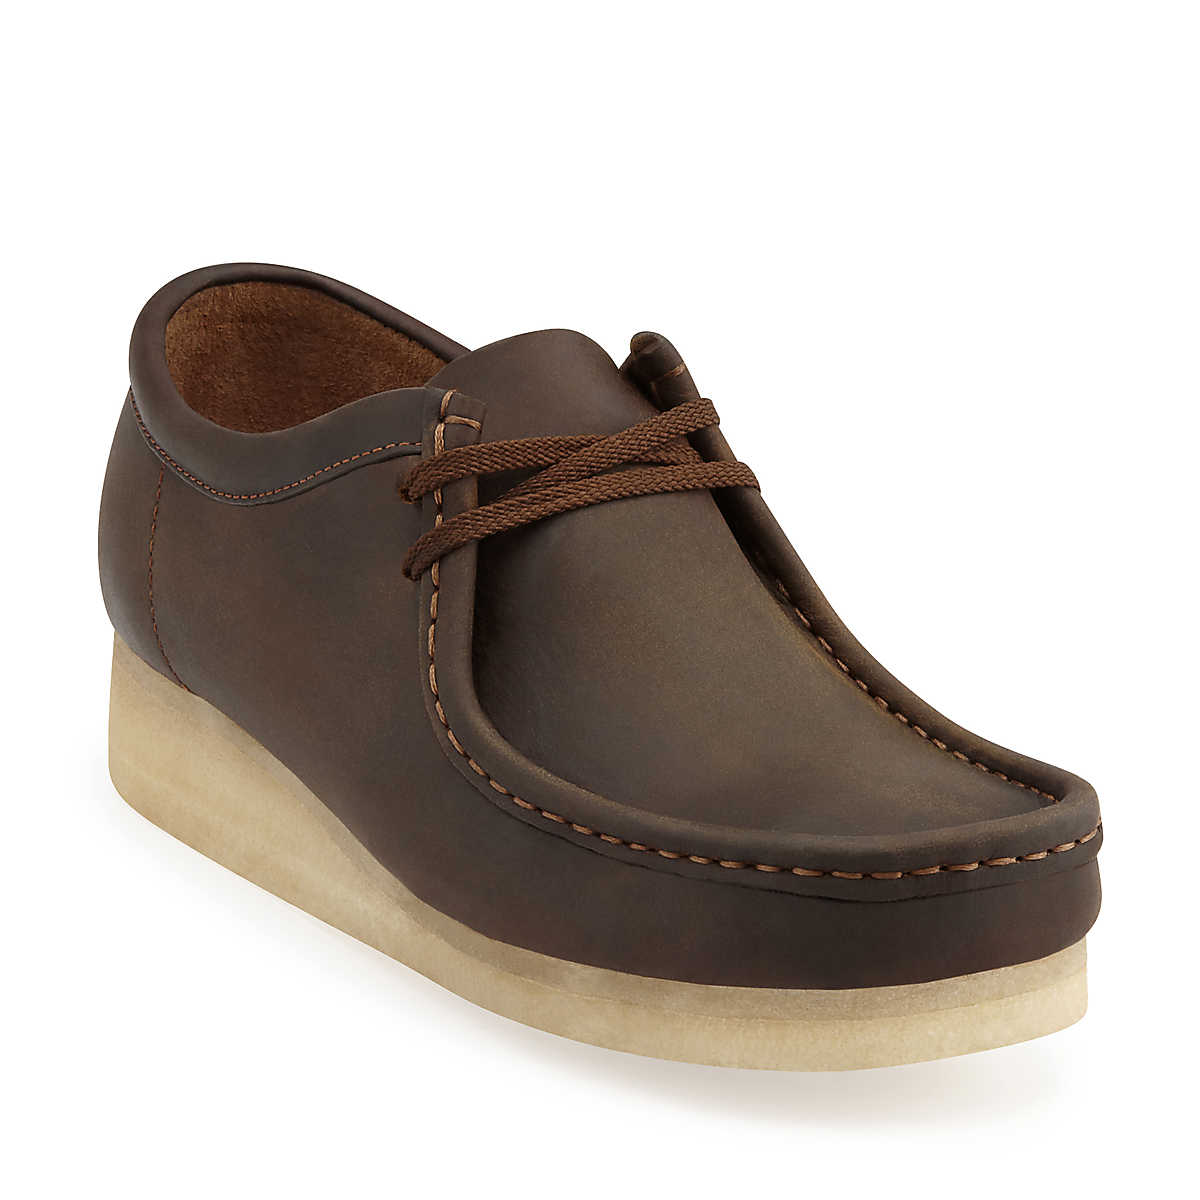 Preorder Clarks Wallabee Beeswax Leather Low 37989 | Jwong Boutique